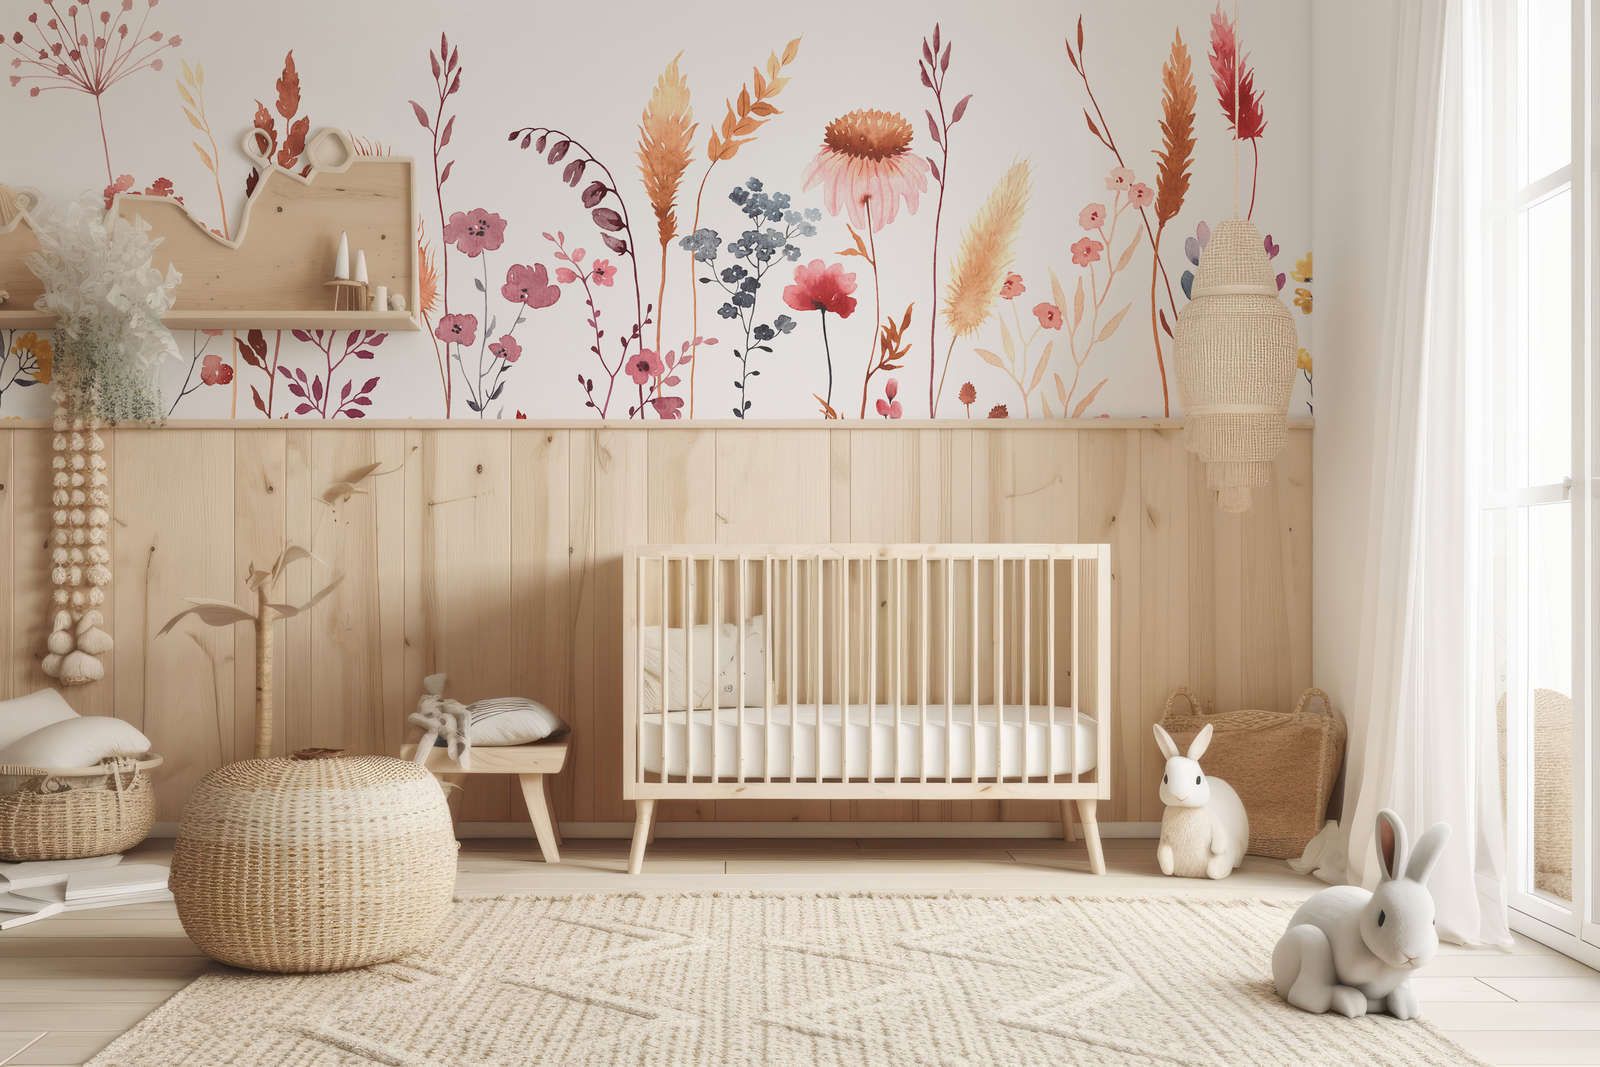             Nursery mural with leaves and grasses - Smooth & pearlescent fleece
        